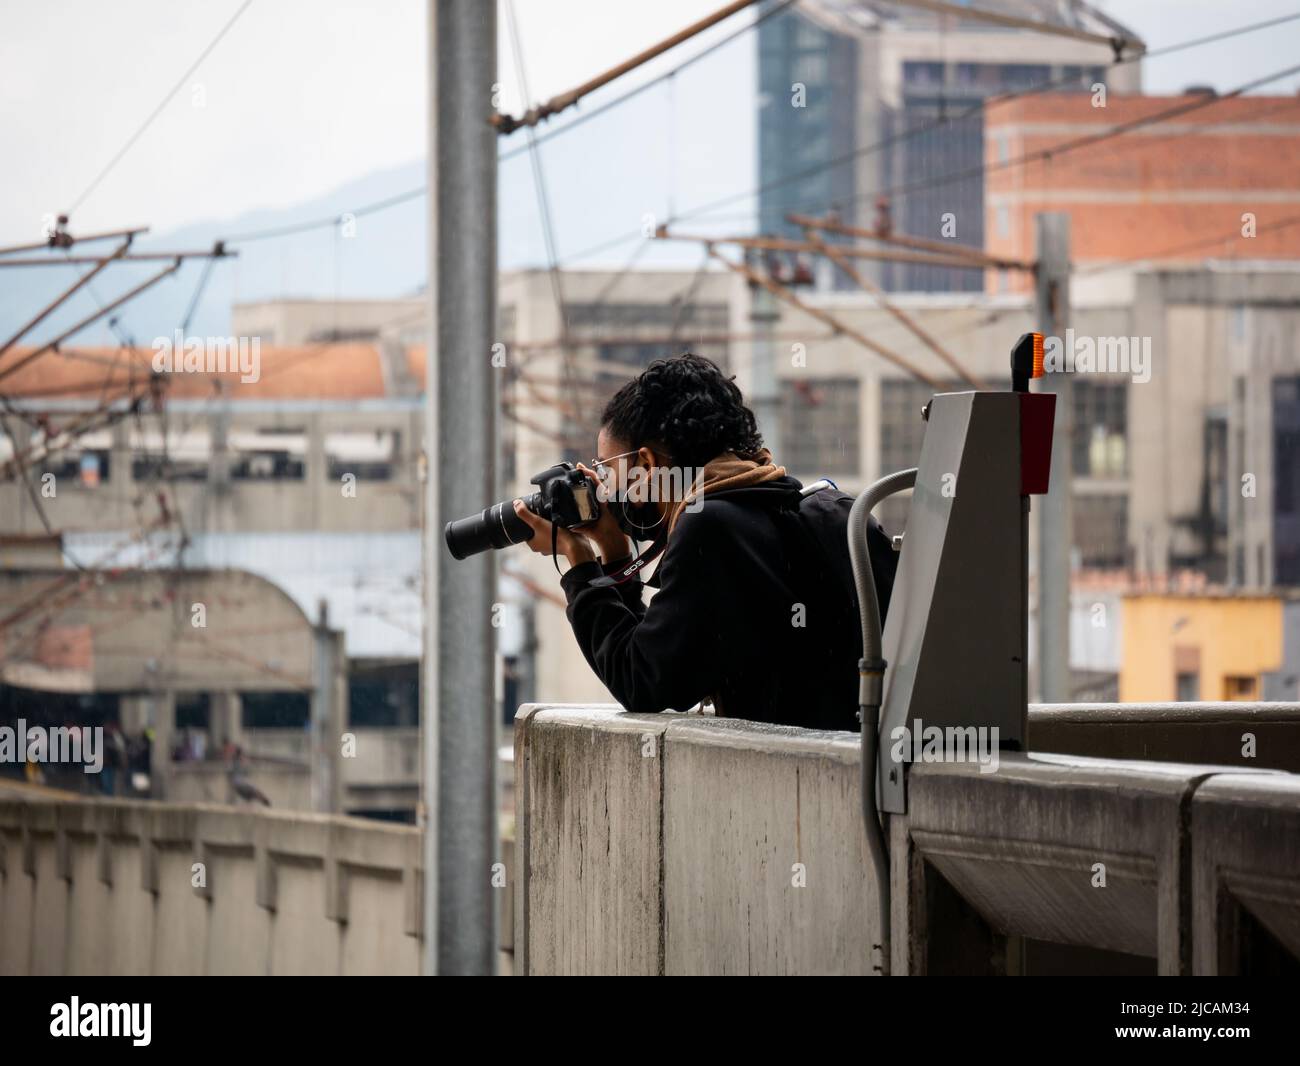 Medellin, Antioquia, Colombia - March 6 2022: Colombian Woman with Black Hair Wears a Black Mask, Big Earrings and Glasses Takes Pictures with her Cam Stock Photo